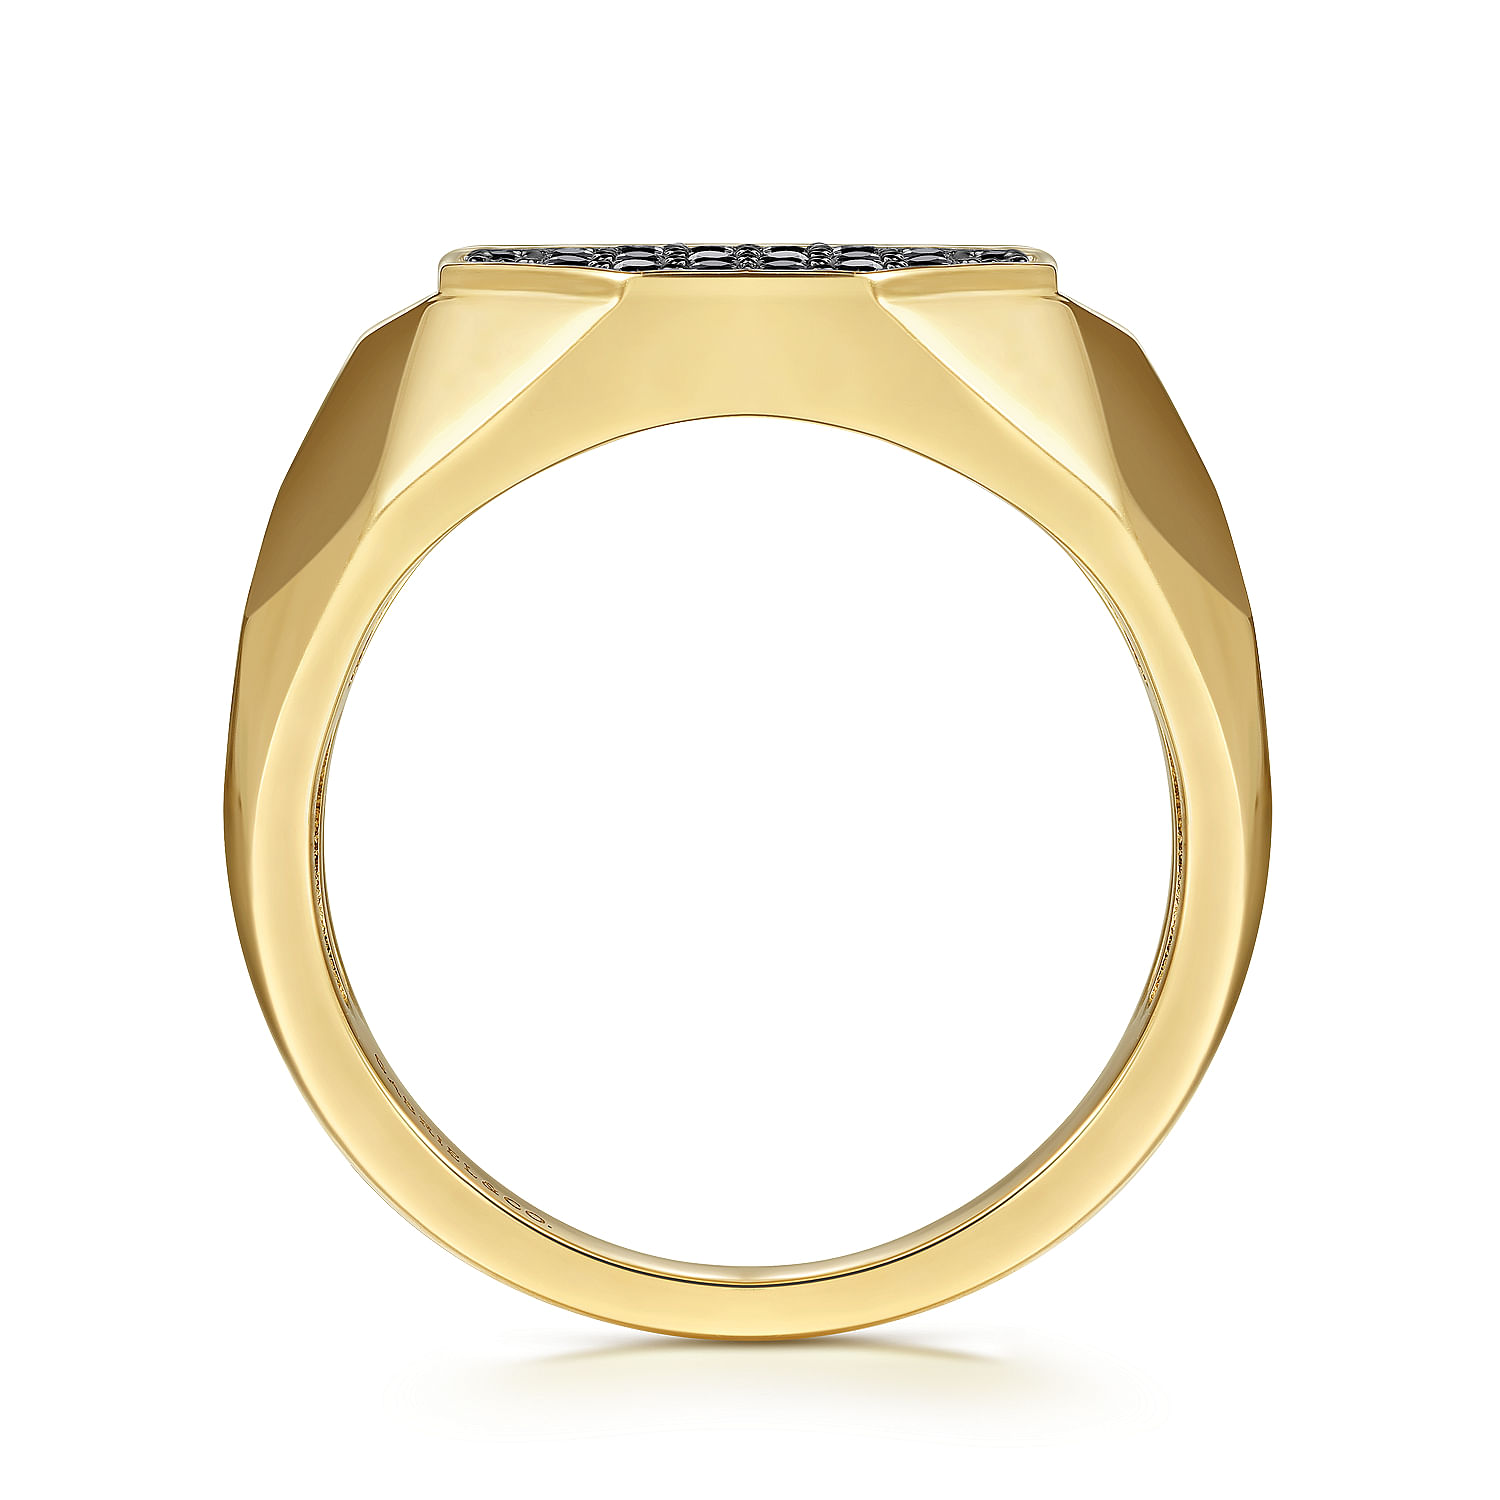 Wide 14K Yellow Gold Faceted Signet Ring with Black Diamond Pavé in High Polished Finish